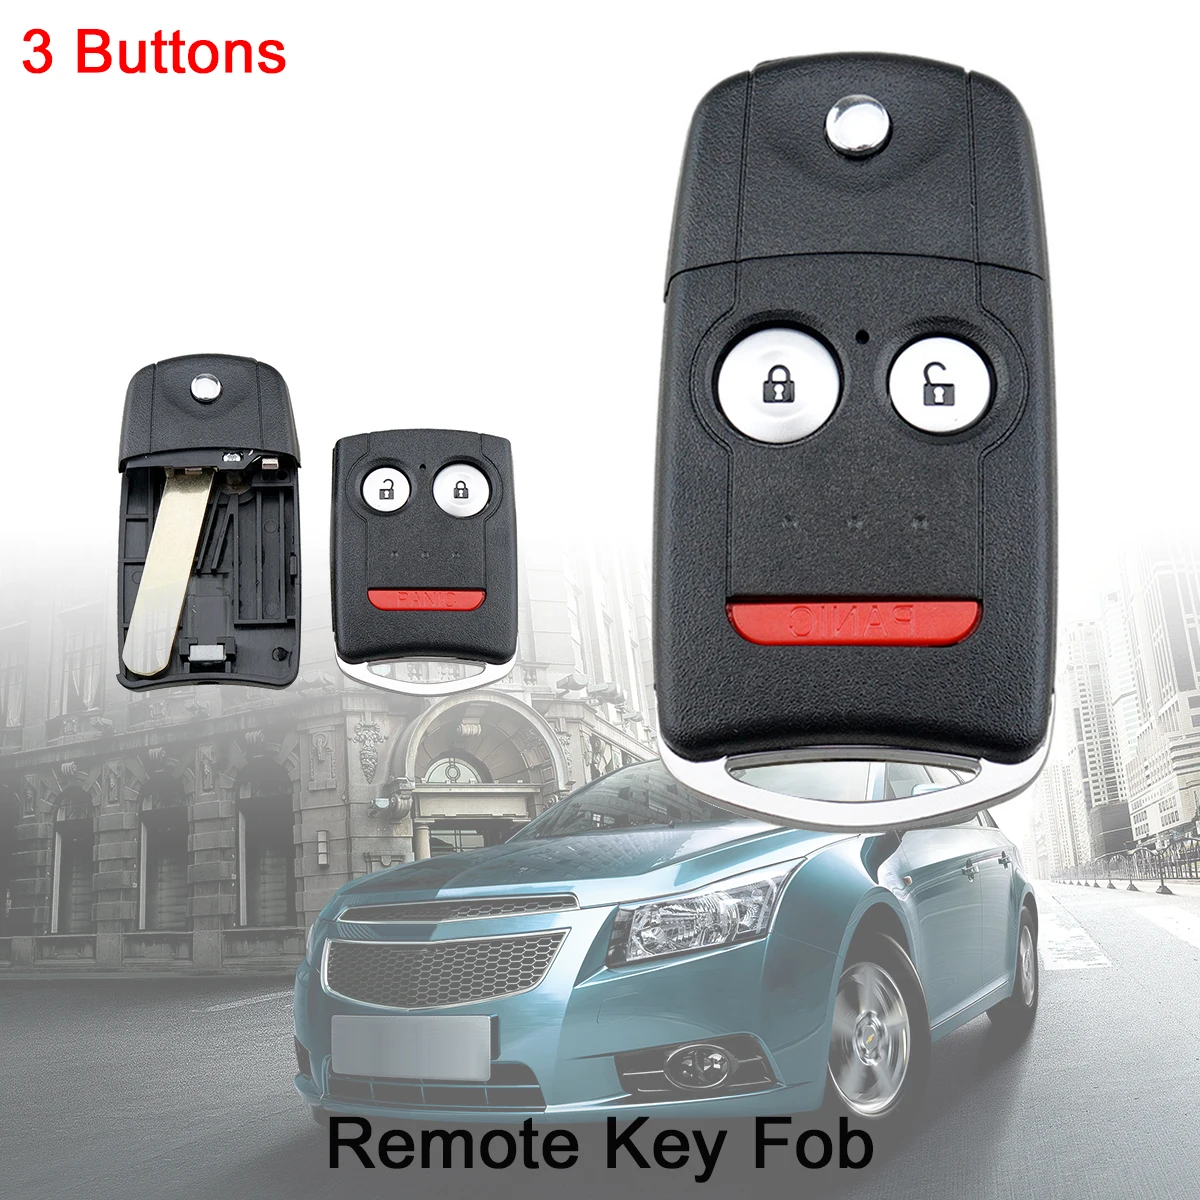 

2 + 1 Buttons Remote Car Key Fob Case Shell Replacement Remote Key Cover with HON66 Blade For Honda Civic Accord CRV Jazz